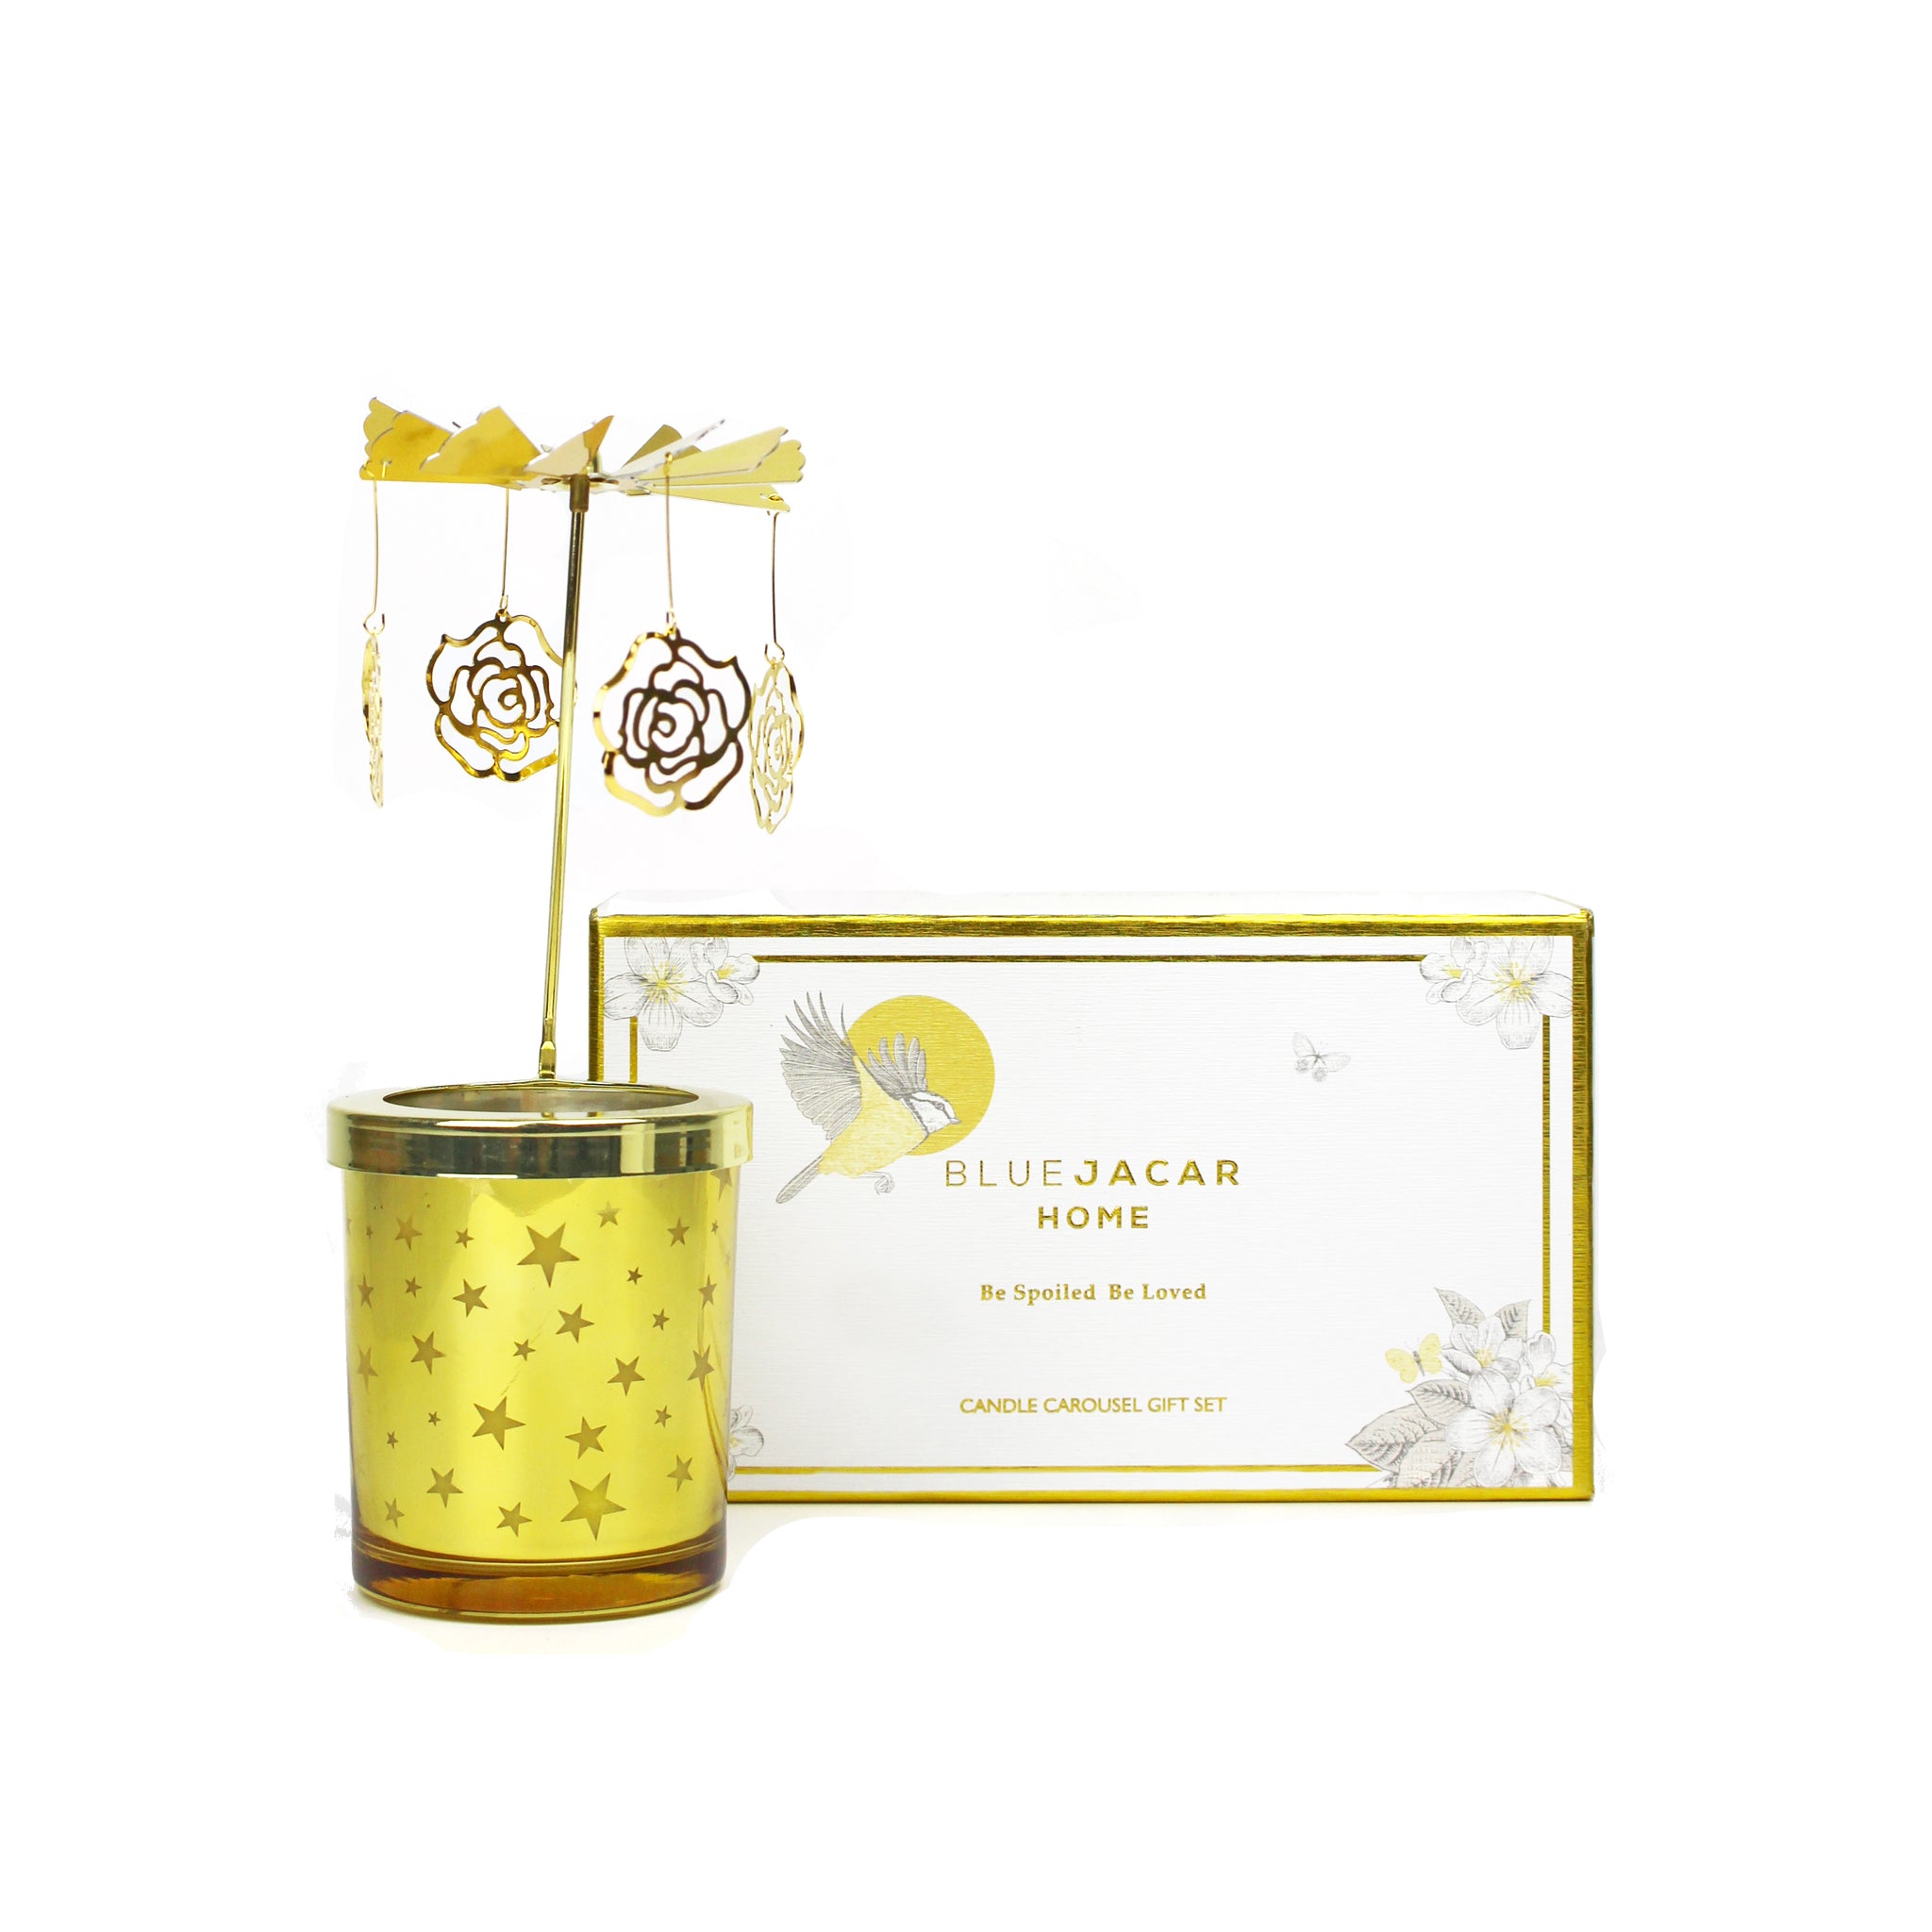 'Golden Bloom' Candle Carousel Gift Set